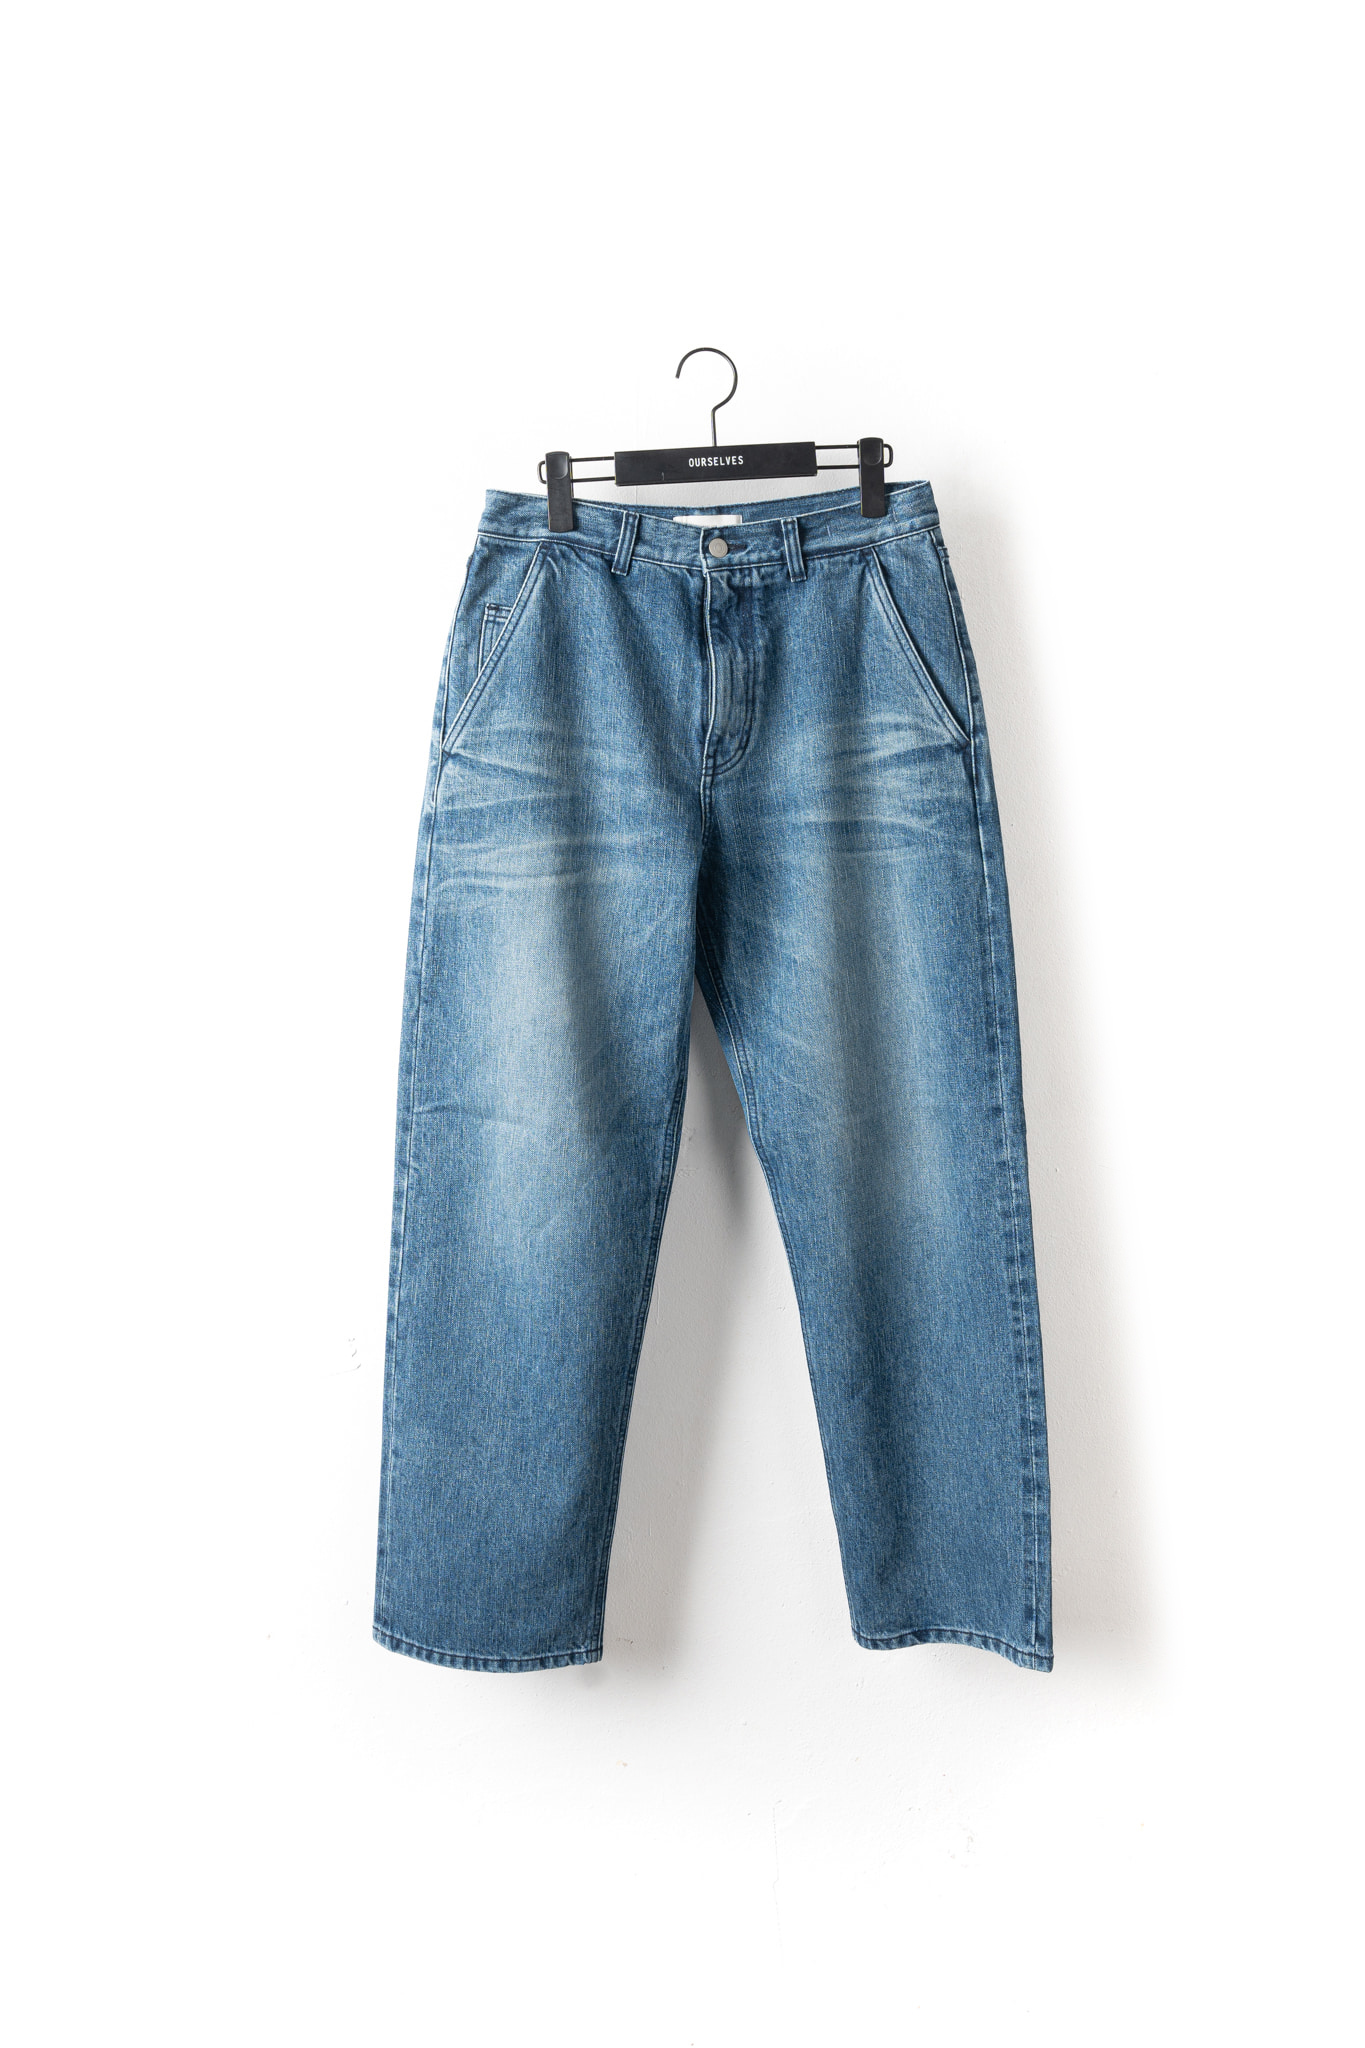 [Restock] 24SS Organic Cotton Relaxed Denim Pants - Washed Blue